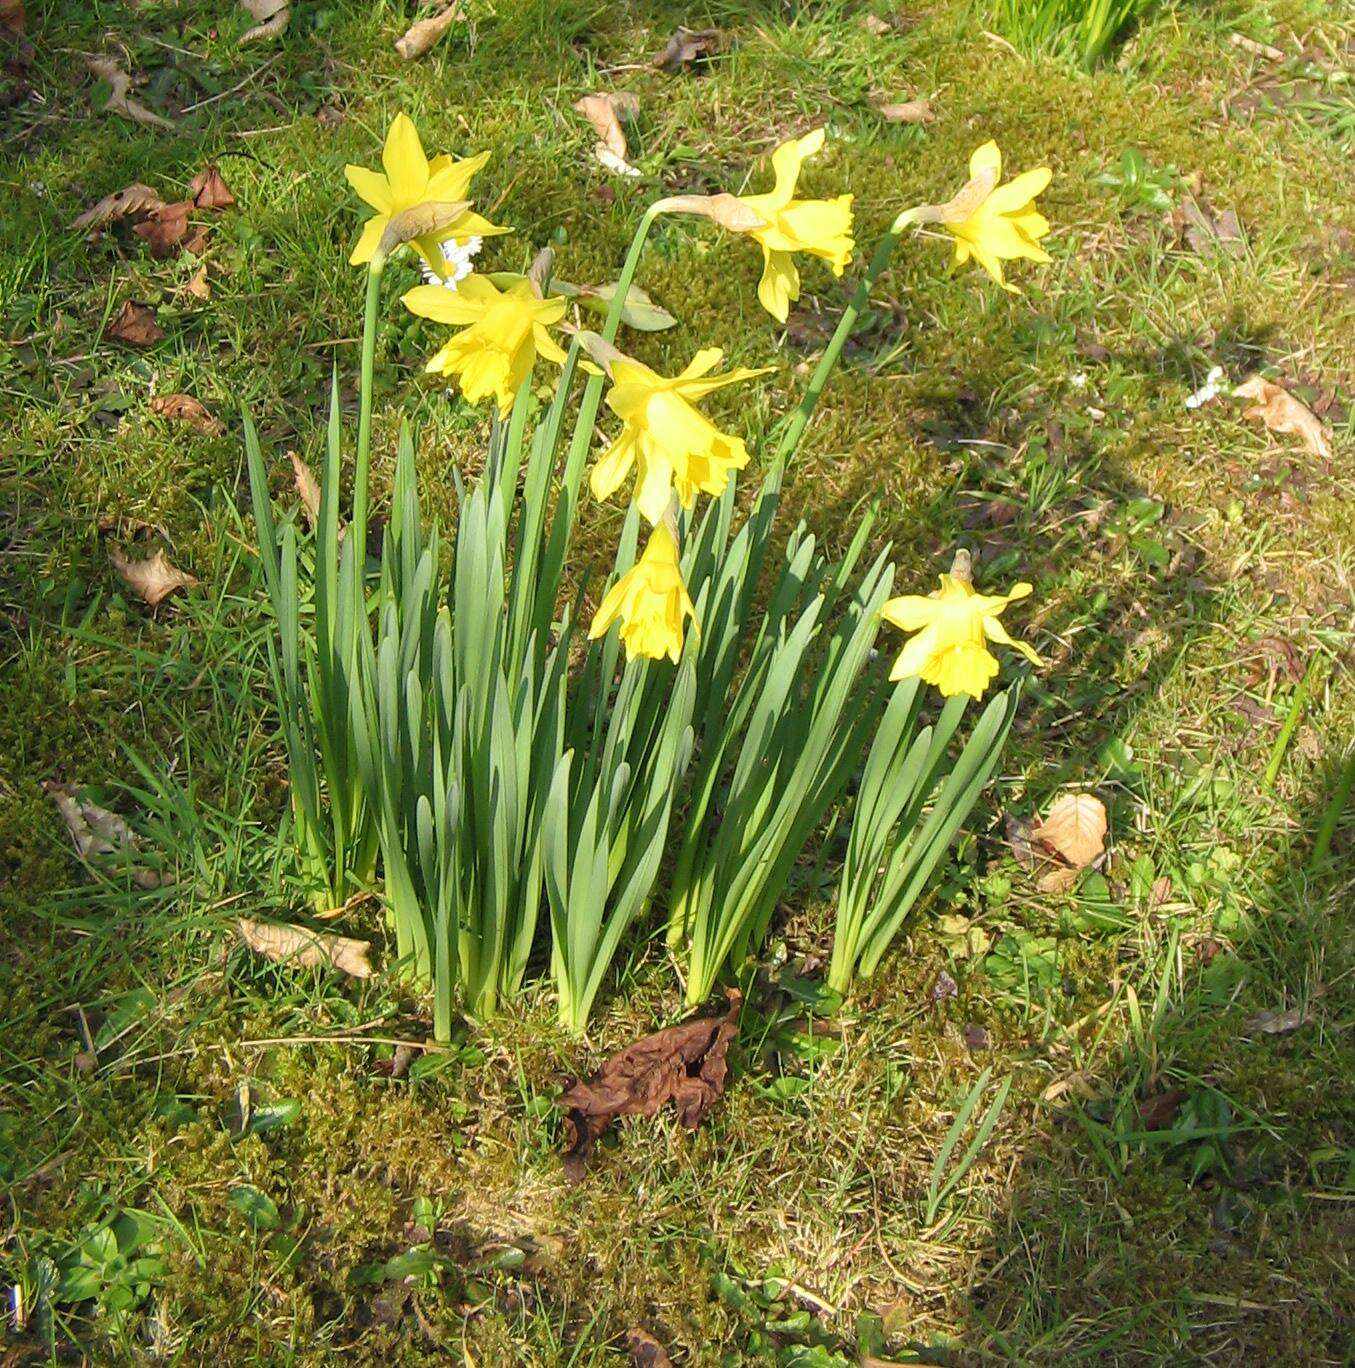 Image of Narcissus pseudonarcissus subsp. major (Curtis) Baker